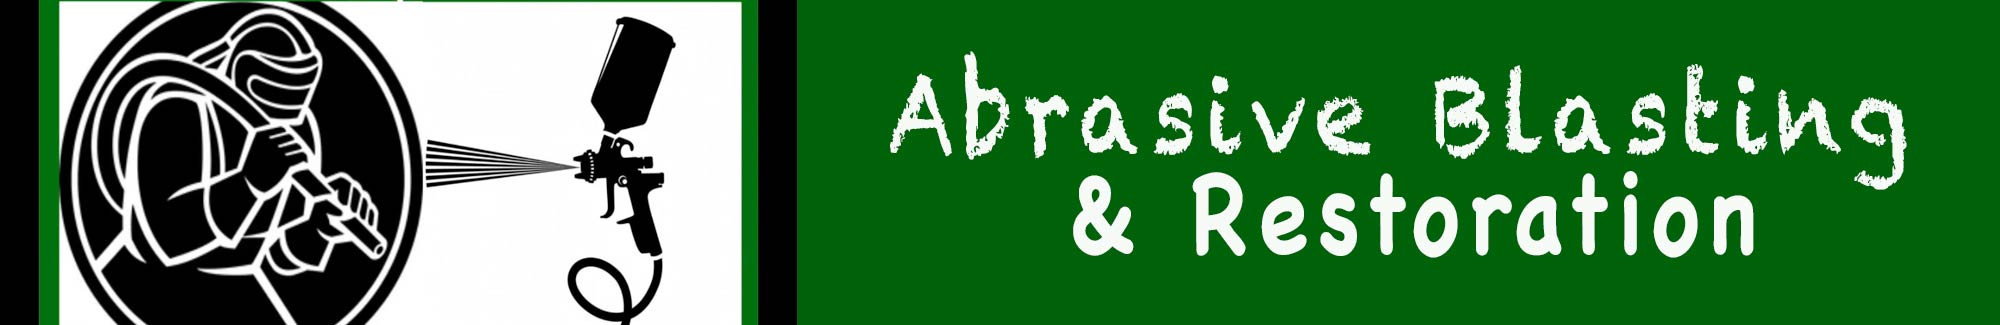 Abrasive Blasting & Coating, Inc., In house and mobile blasting services